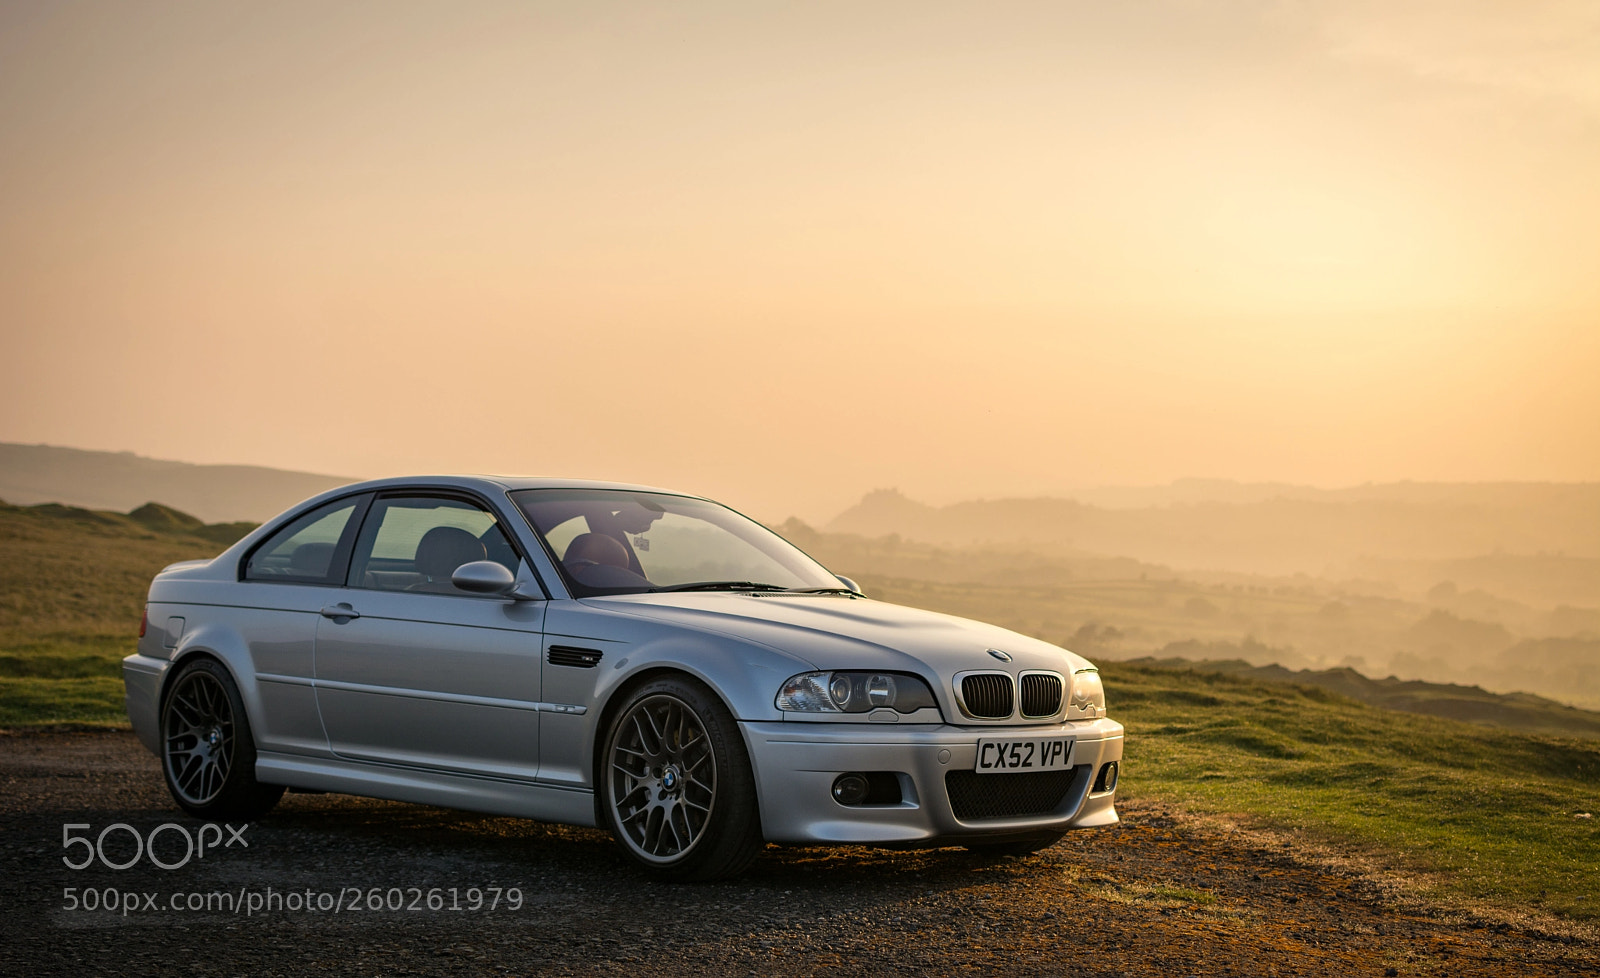 Nikon D7100 sample photo. Bmw sunset in the photography